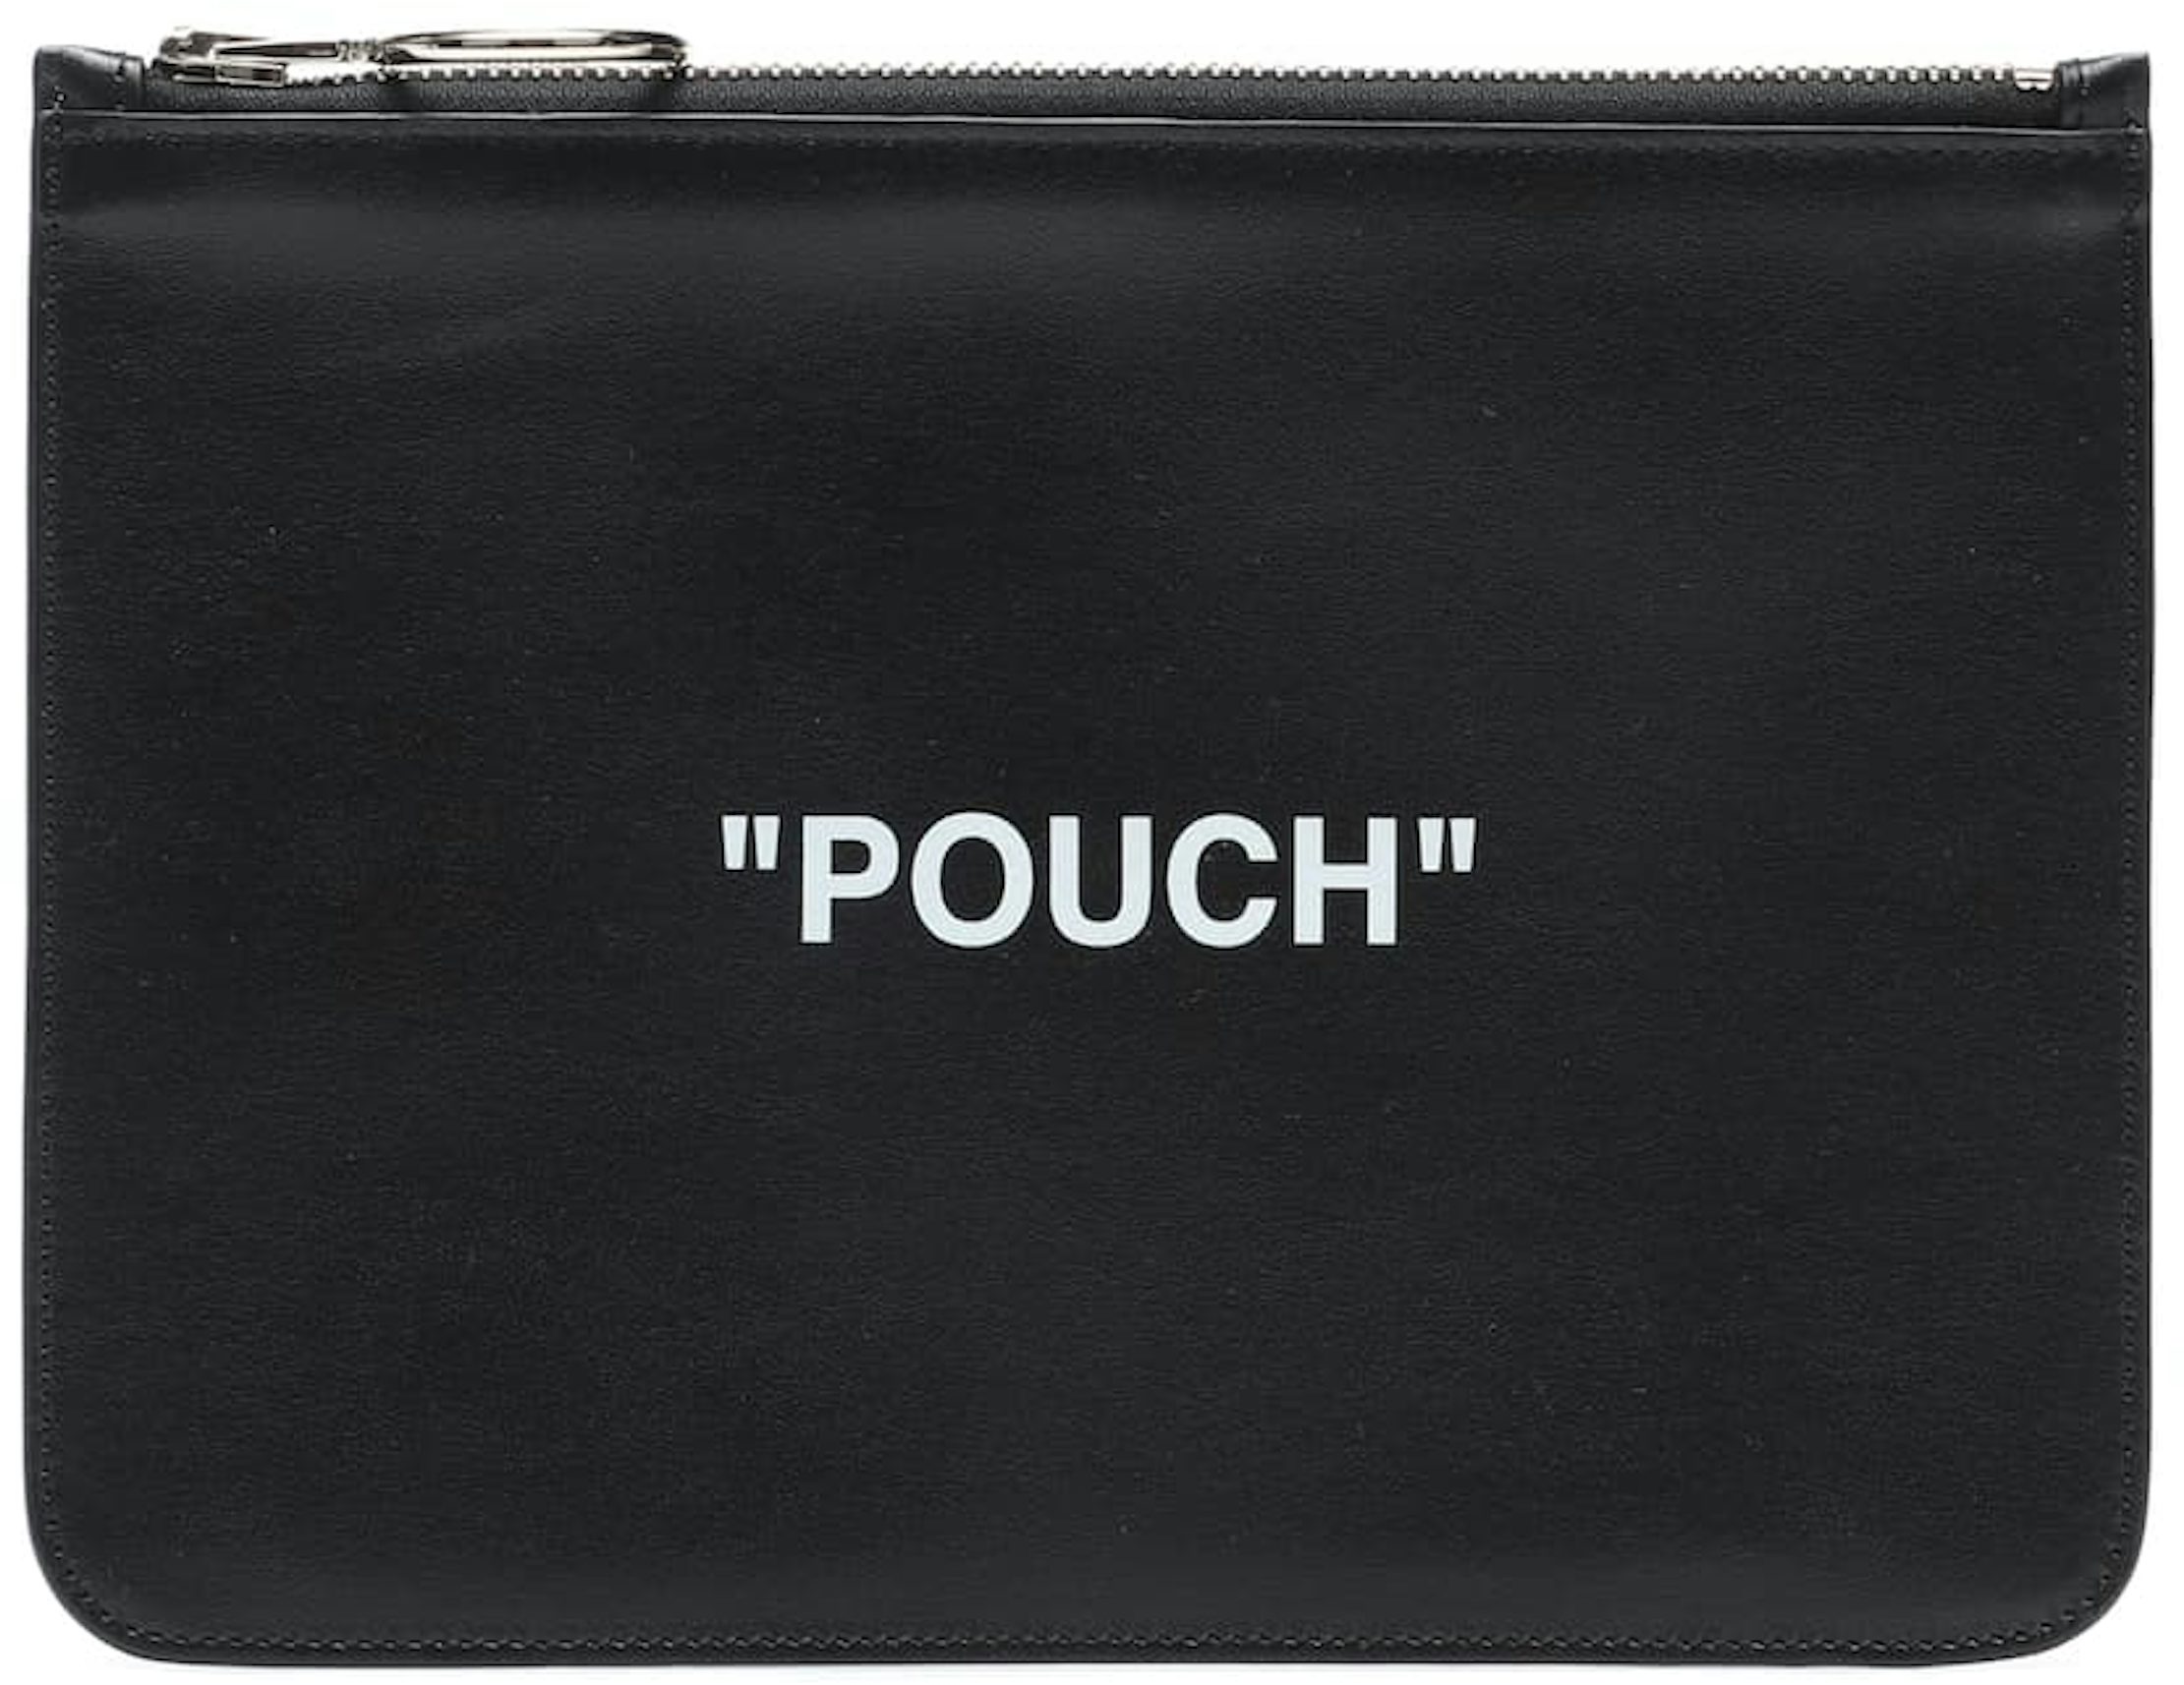 Off-White c/o Virgil Abloh Sculpture Block Pouch Leather Bag in Black